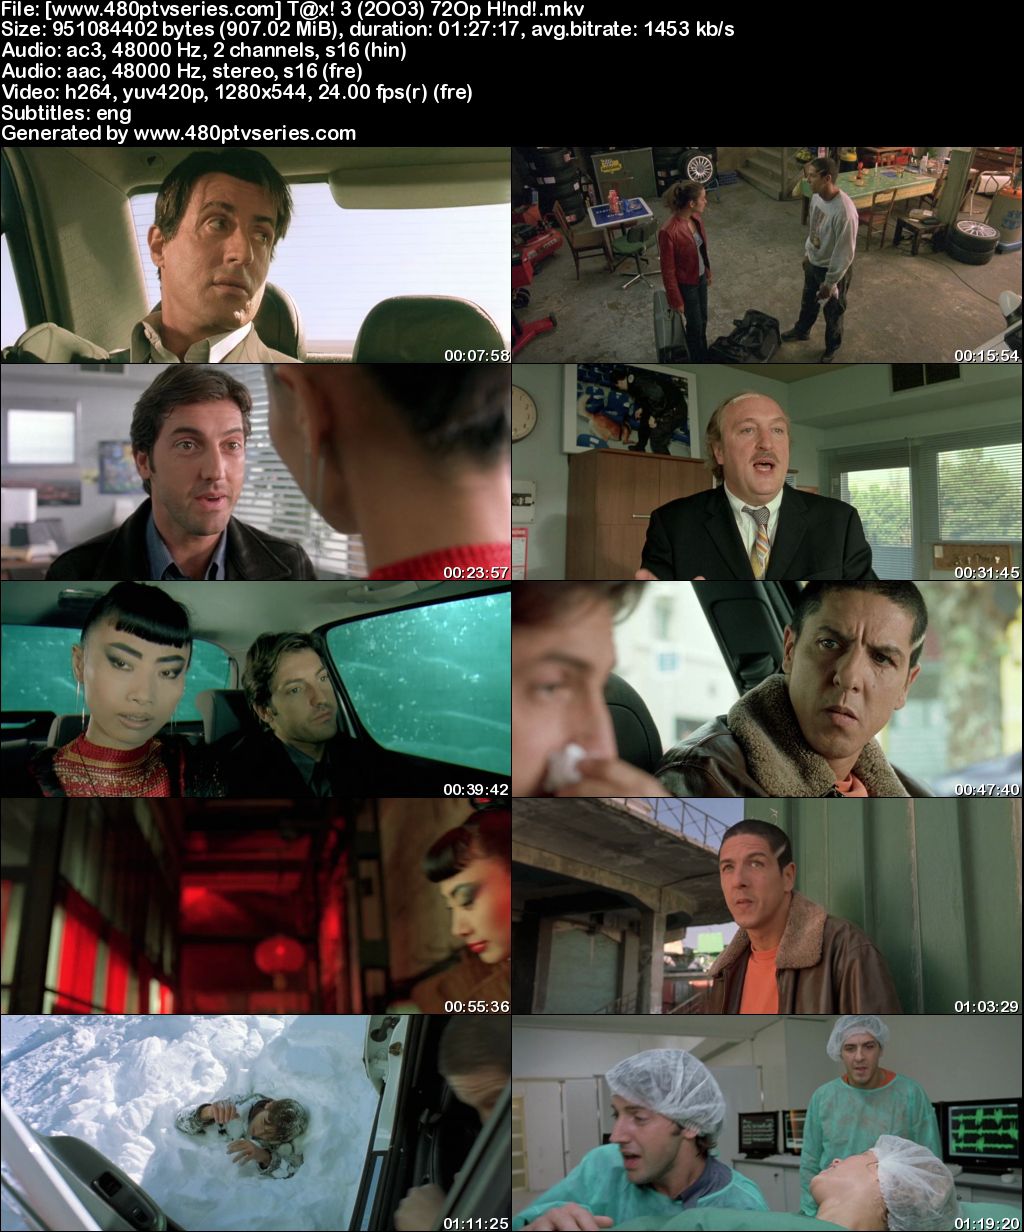 Watch Online Free Taxi 3 (2003) Full Hindi Dual Audio Movie Download 480p 720p Bluray